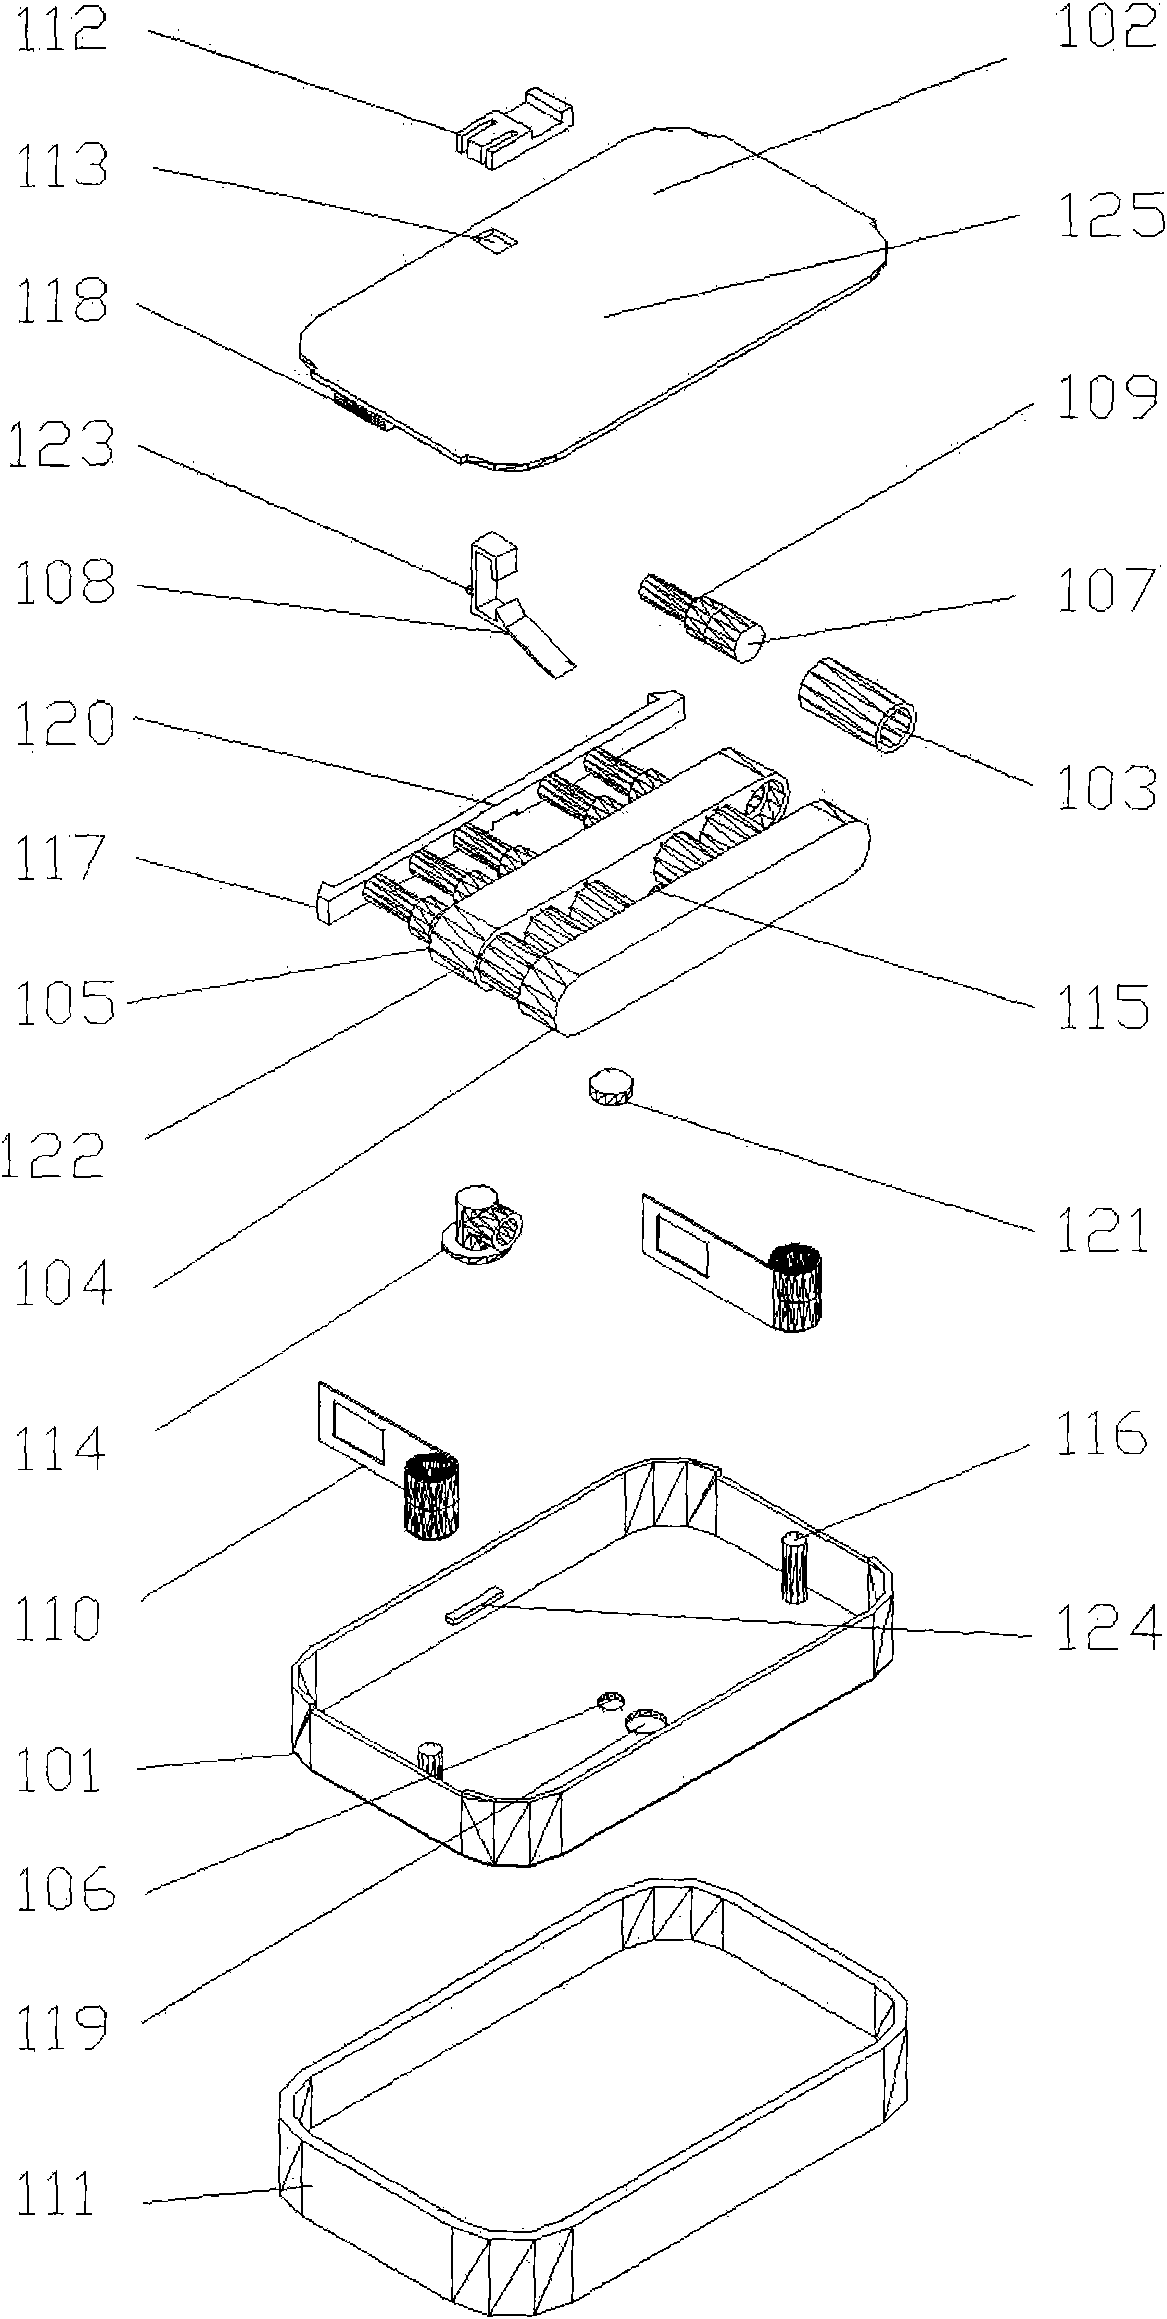 Disposable drug administration device with own power